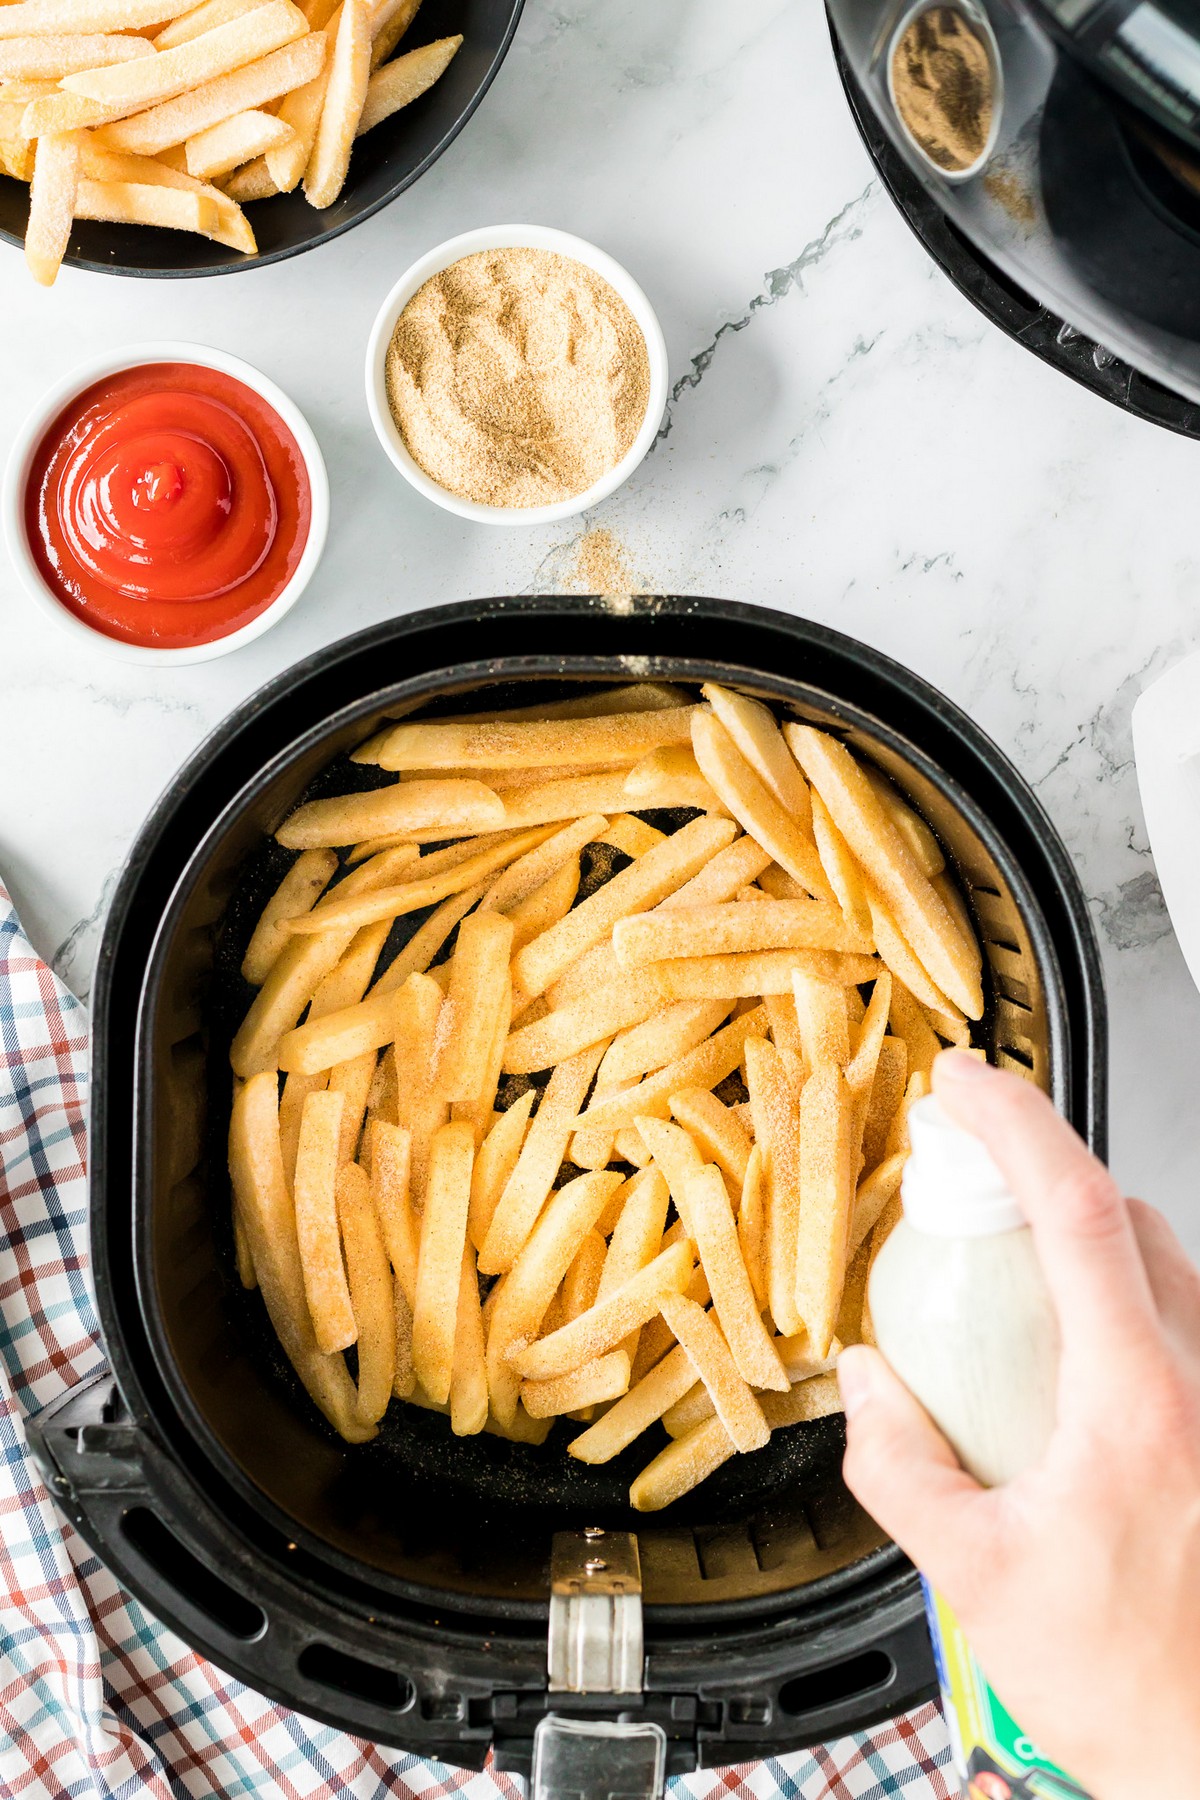 spraying oil on frozen french fries in air fryer